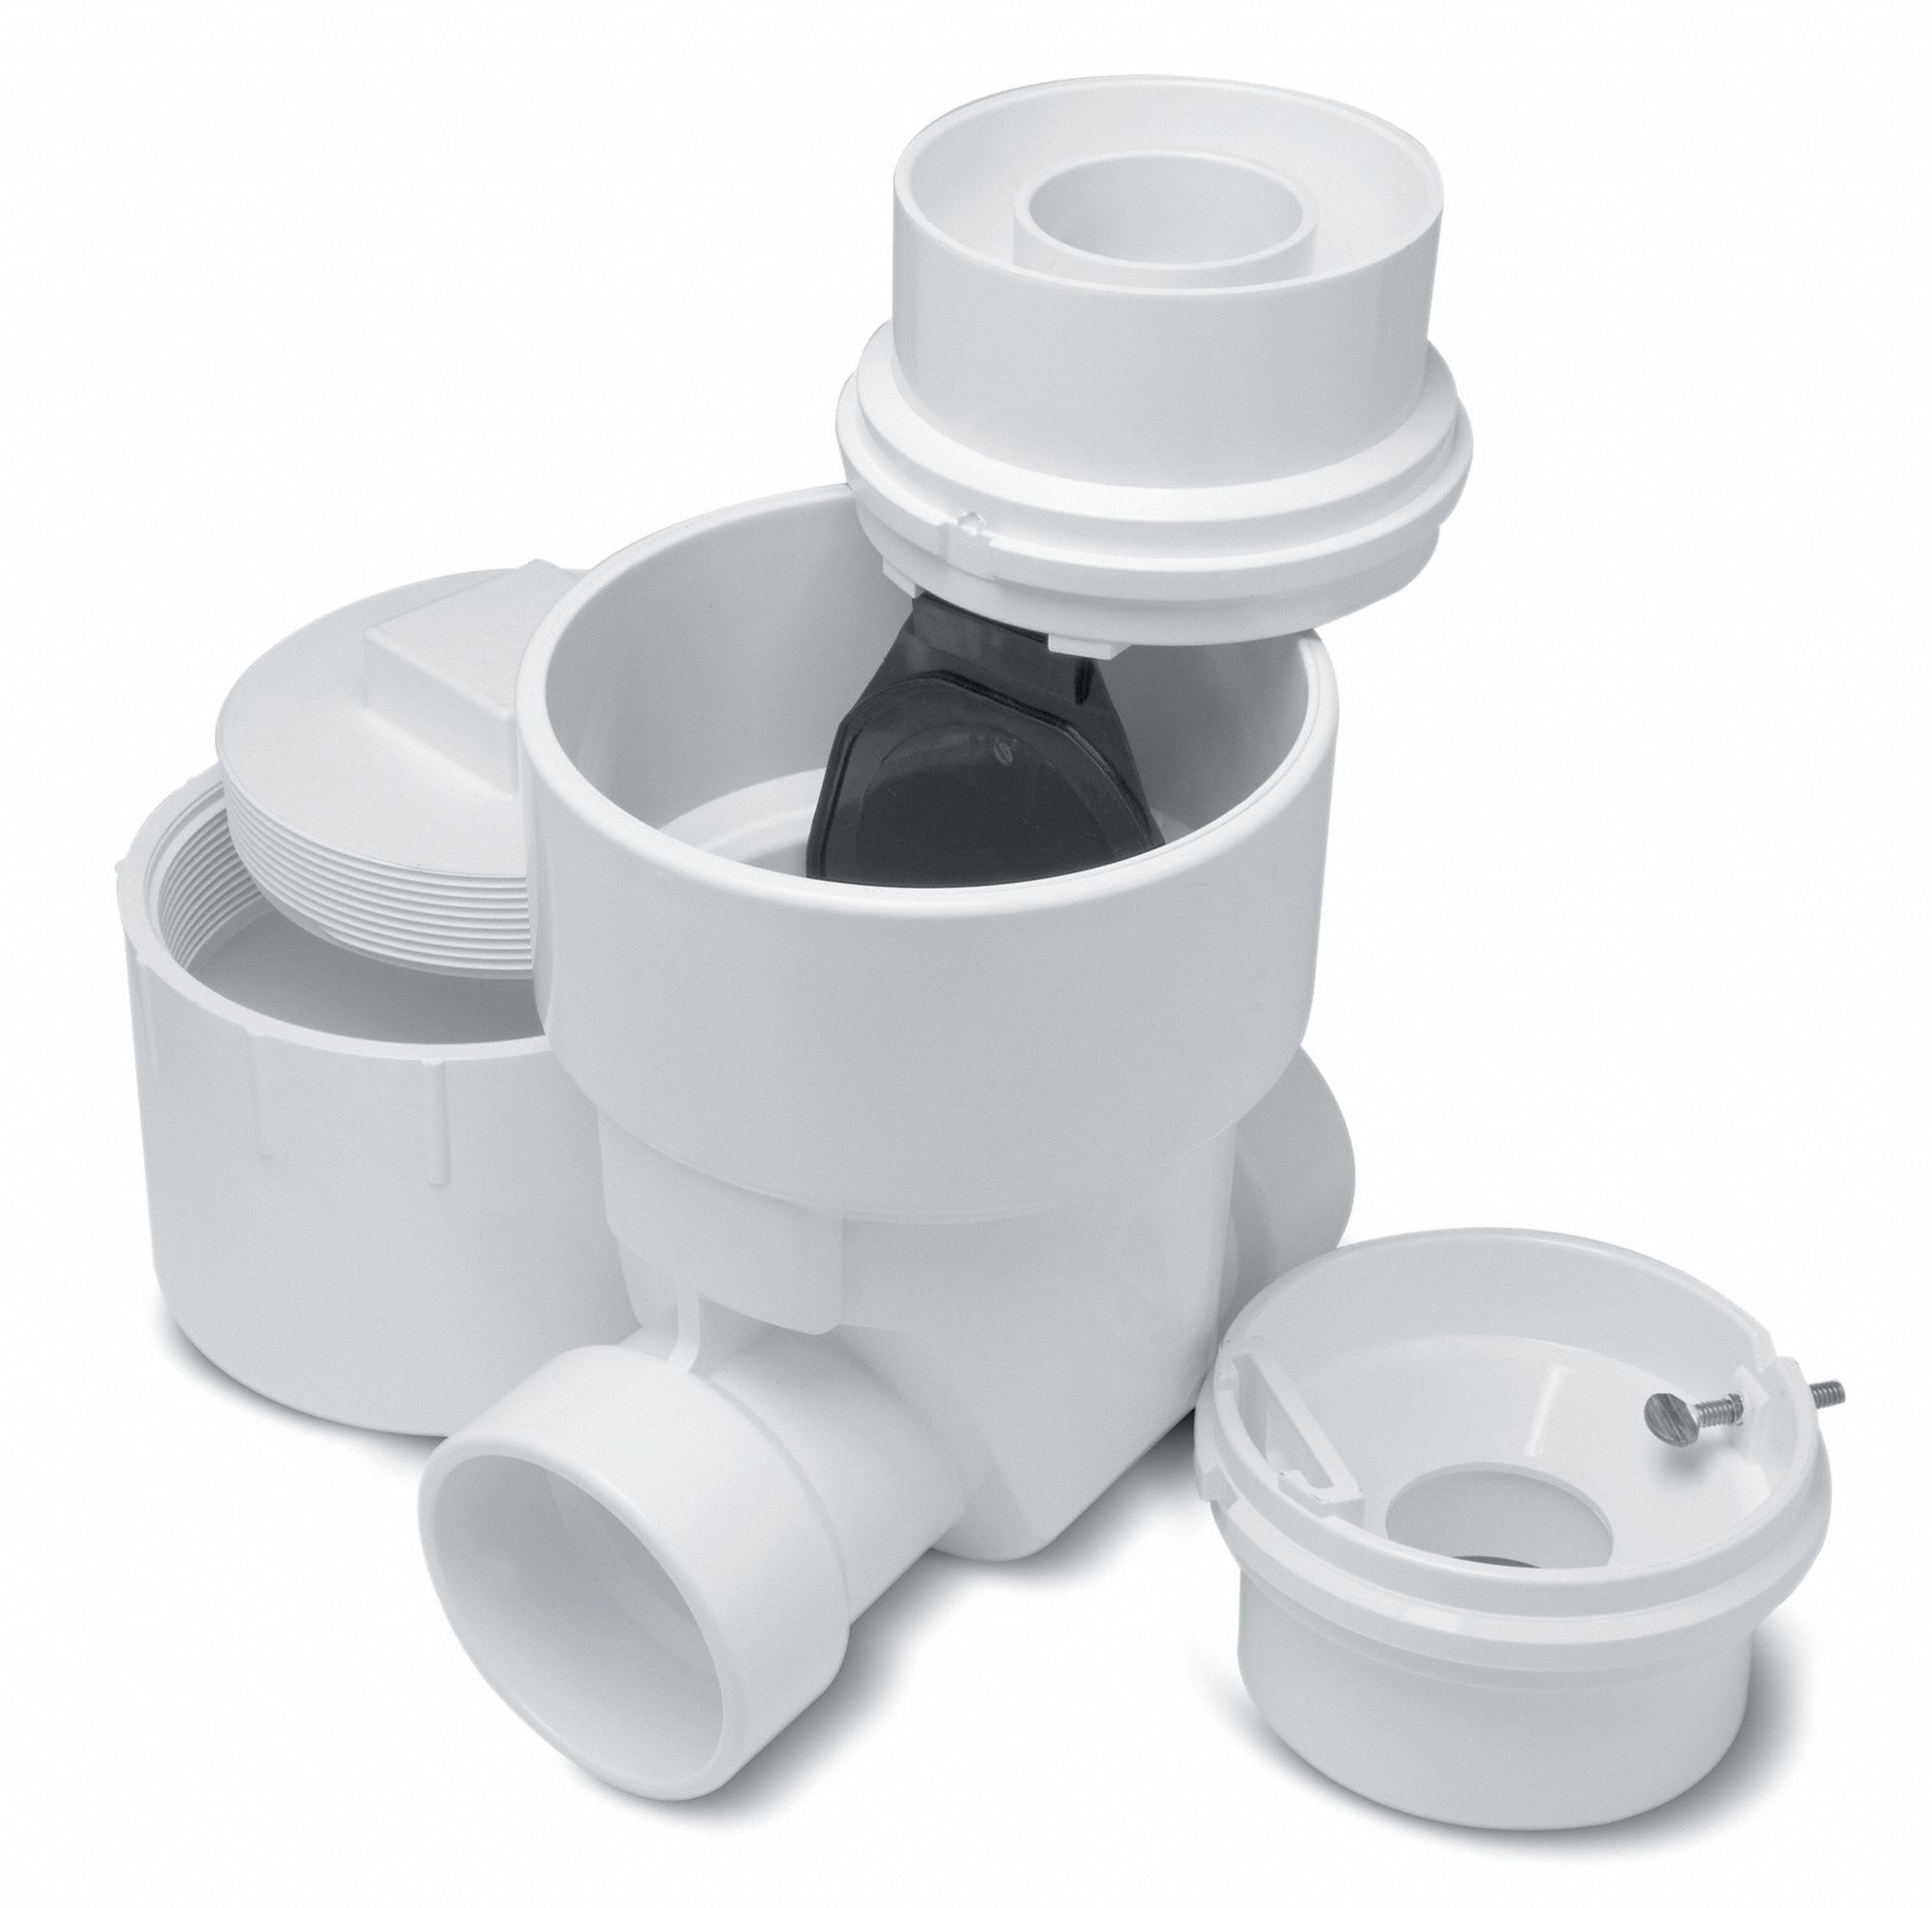 Backwater Valve: 3 in Pipe Size, Slip, PVC, 9 5/8 in Inlet to Outlet Lg, 75 psi Max. Water Pressure